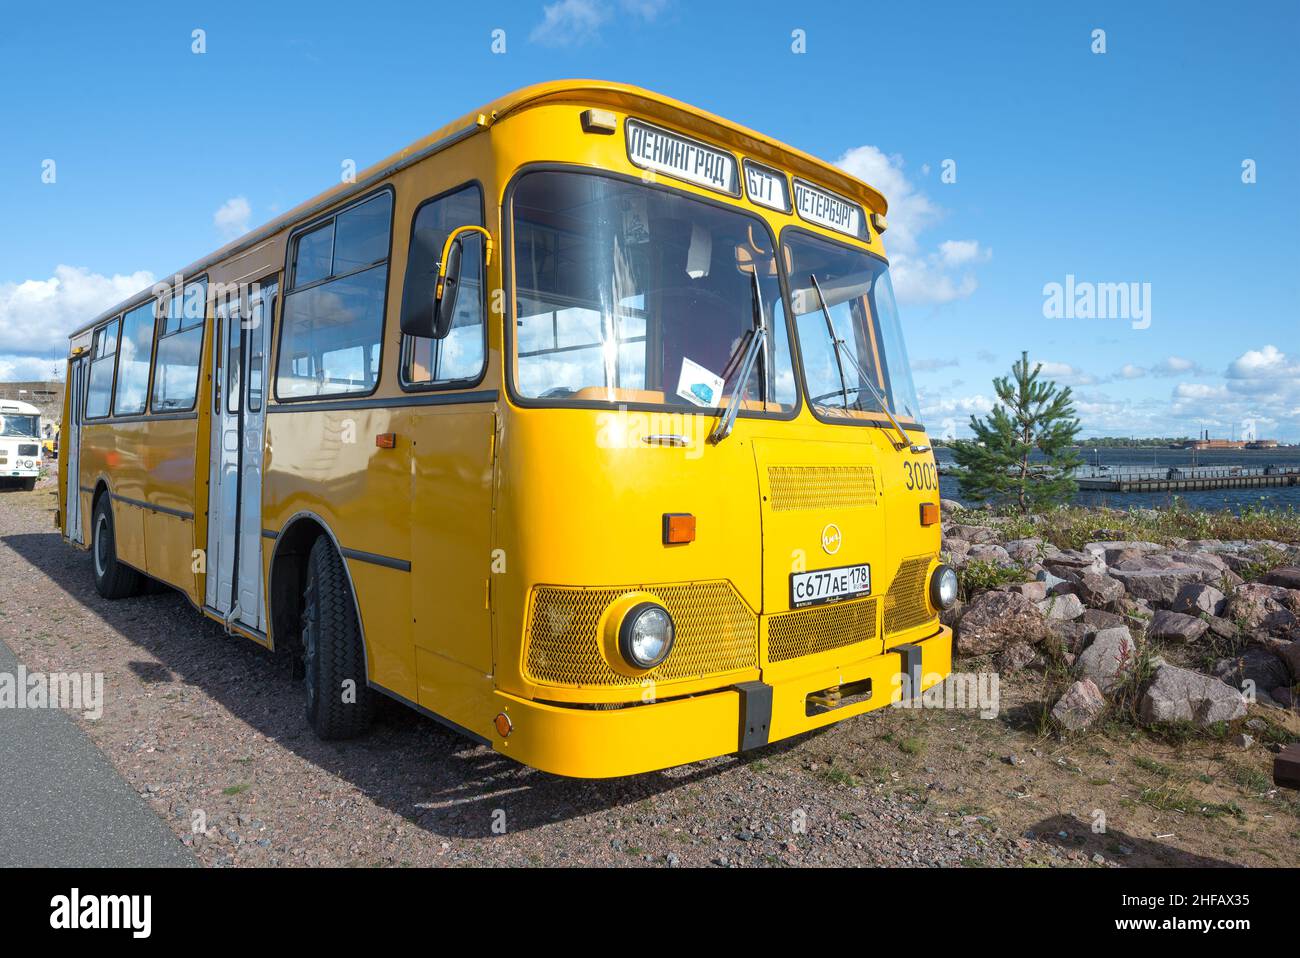 KRONSTADT, RUSSIA - SEPTEMBER 14, 2019: Soviet city bus LiAZ-677 close-up on a sunny day. Festival of retro transport 'Fortuna-2019' Stock Photo